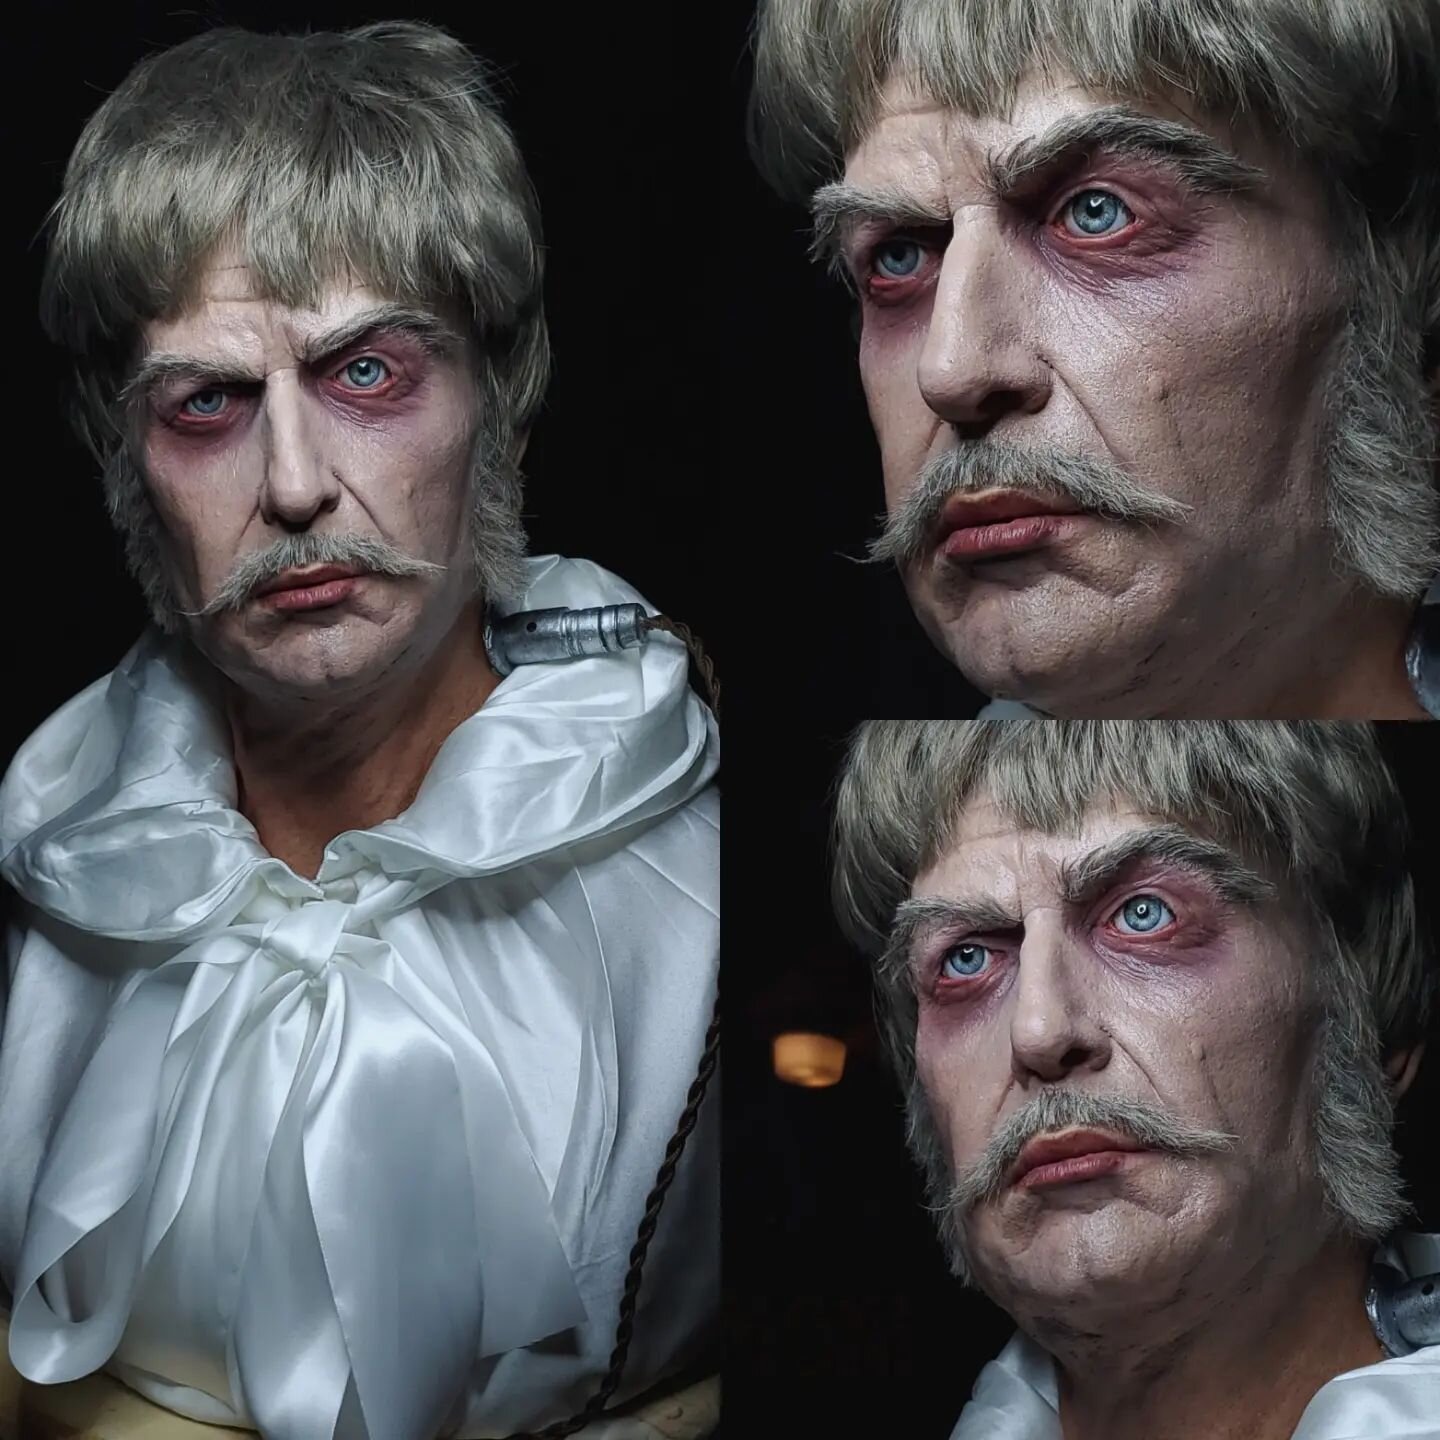 Made an incredibly fun life-size Vincent Price bust from The Abominable Dr. Phibes! I absolutely love this movie! This year also marked the 50th anniversary of its release. 

#fx #specialfx #sculpture #sculpt #abominabledrphibes #theabominabledrphibe